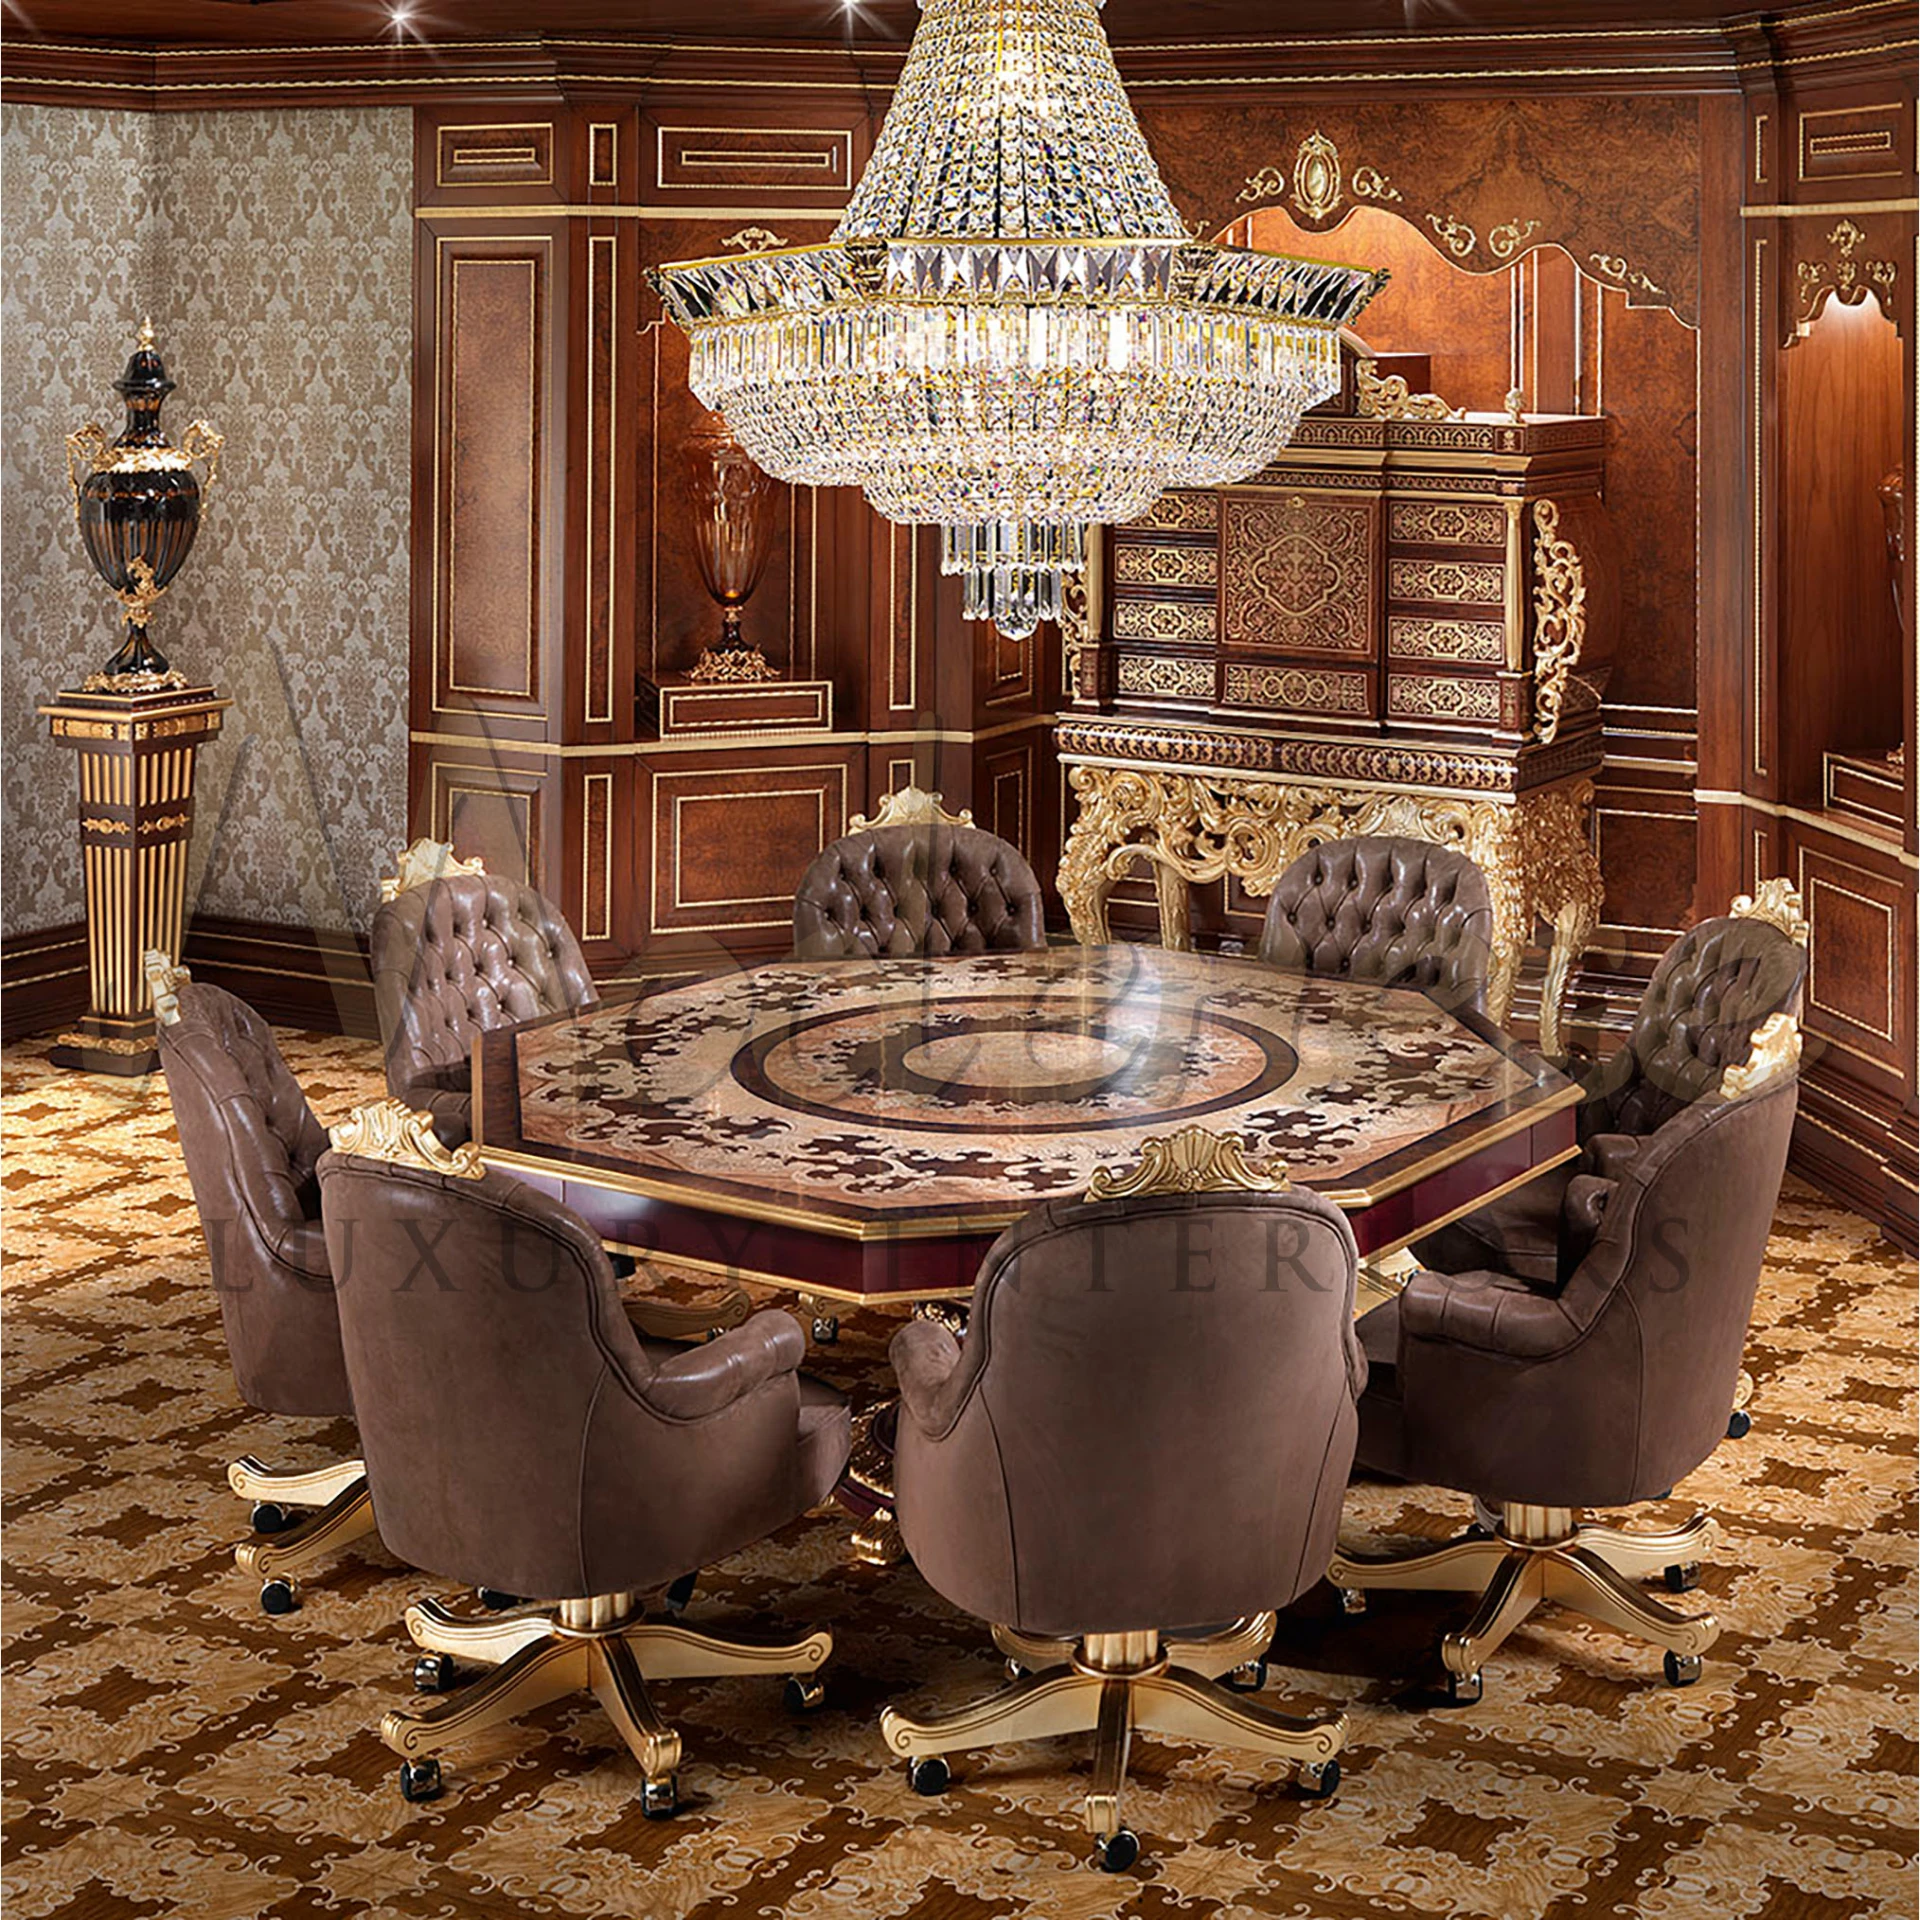 Gold Leaf Center Tables - Handcrafted Inlaid Wood Table | Modenese Luxury Furniture